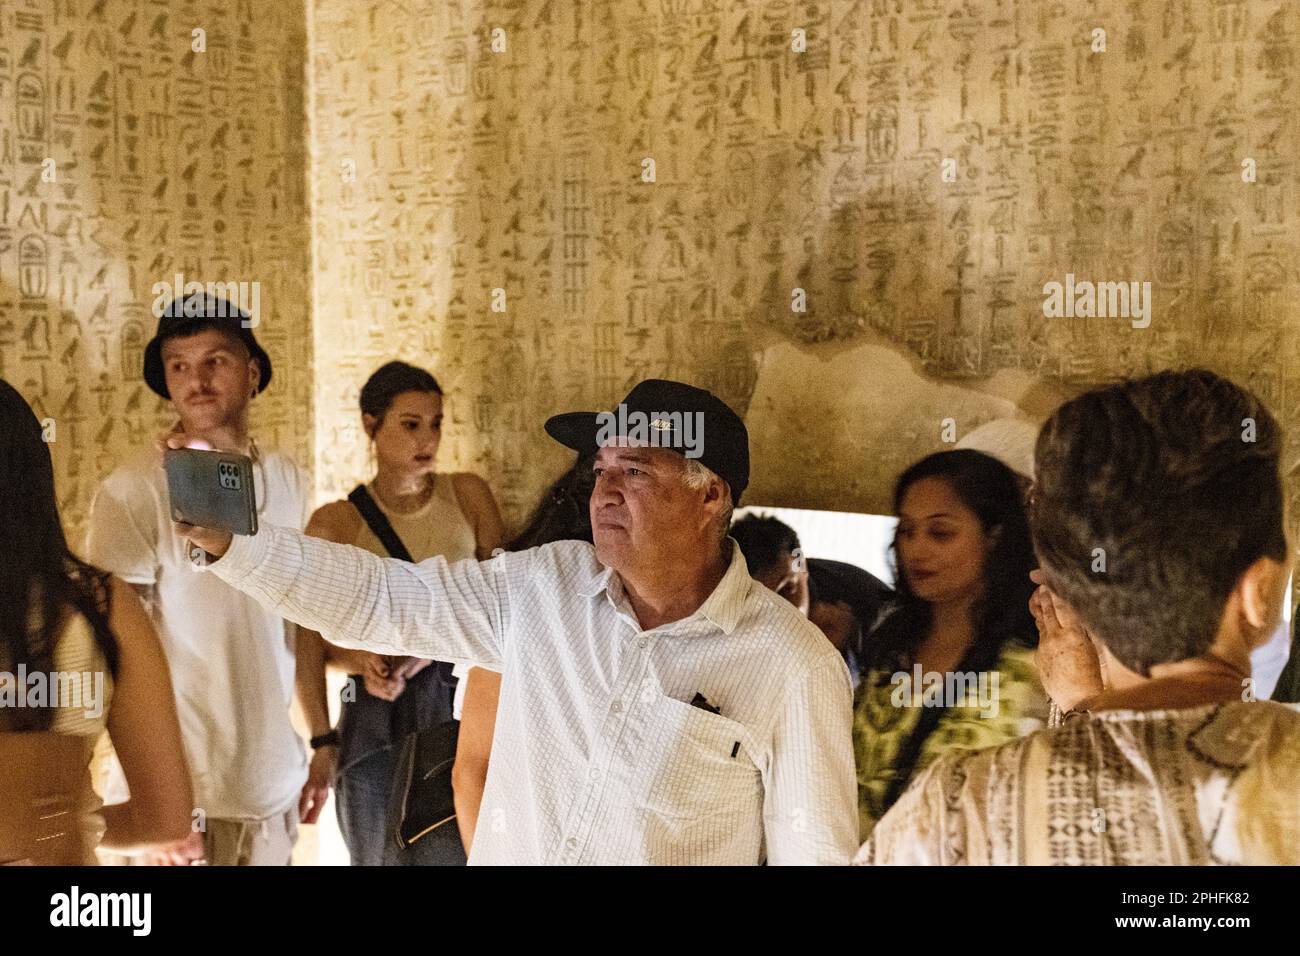 People / Tourists taking photos of the hieroglyphics in an underground burial chamber inside the Pyramid of Unas at Saqqara Necropolis in Giza, Egypt Stock Photo